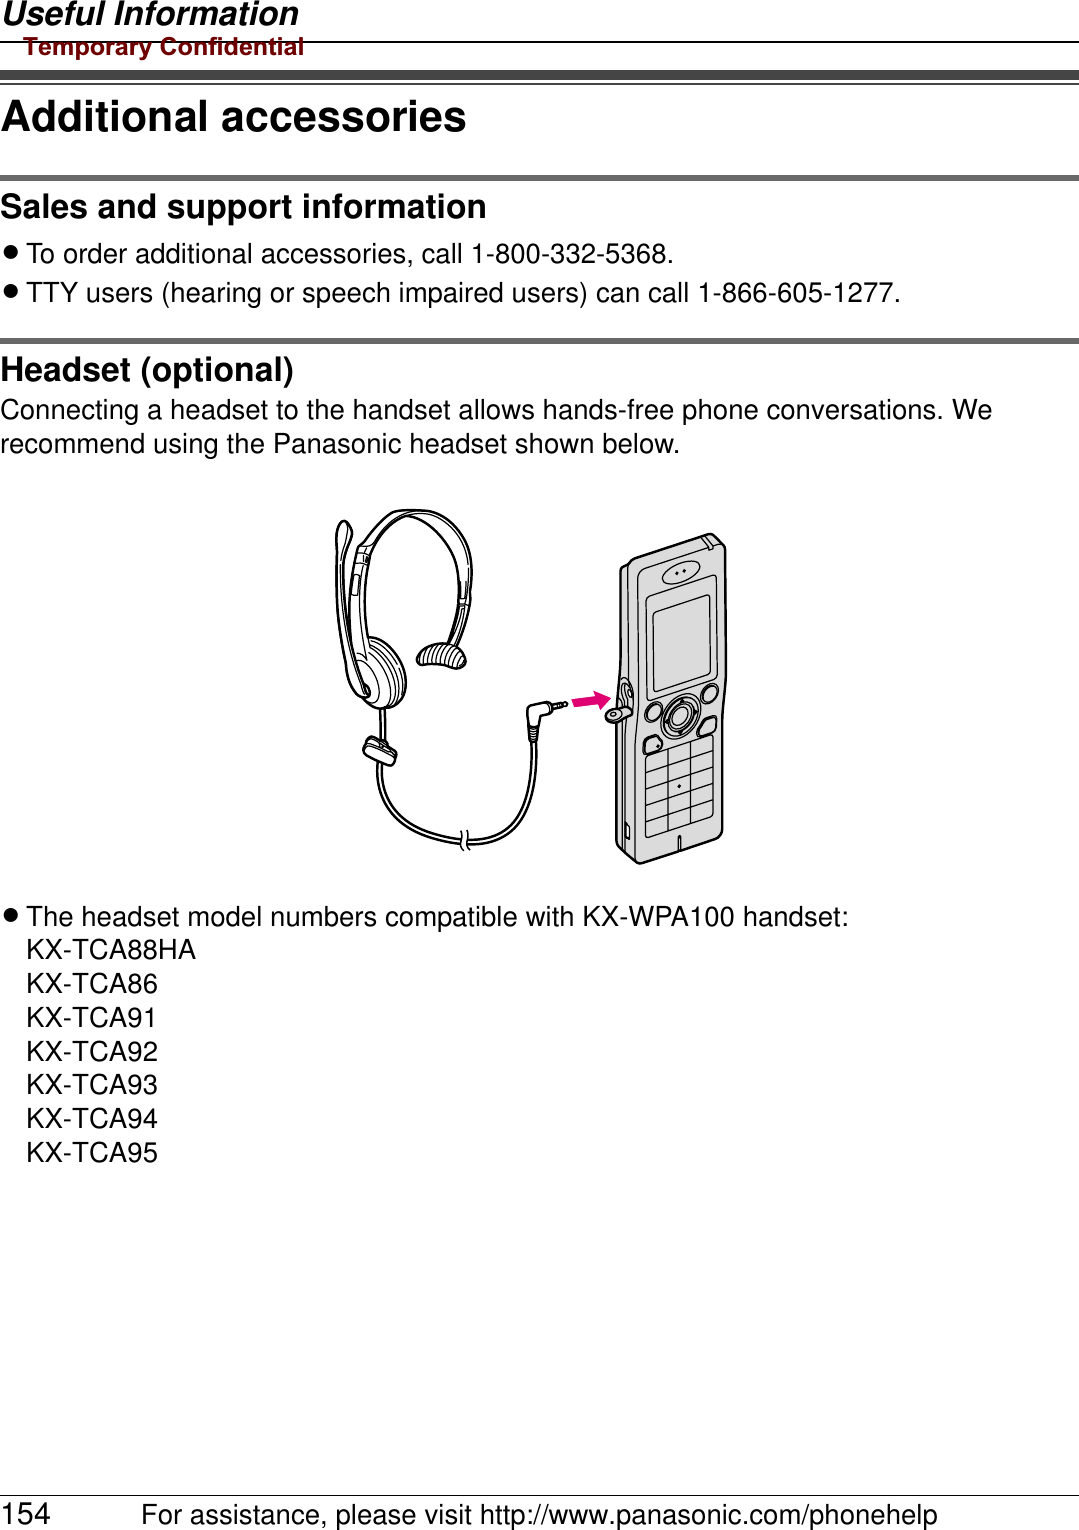 Useful Information154 For assistance, please visit http://www.panasonic.com/phonehelpAdditional accessoriesSales and support informationLTo order additional accessories, call 1-800-332-5368.LTTY users (hearing or speech impaired users) can call 1-866-605-1277.Headset (optional)Connecting a headset to the handset allows hands-free phone conversations. We recommend using the Panasonic headset shown below.LThe headset model numbers compatible with KX-WPA100 handset:KX-TCA88HAKX-TCA86KX-TCA91KX-TCA92KX-TCA93KX-TCA94KX-TCA95Temporary Confidential